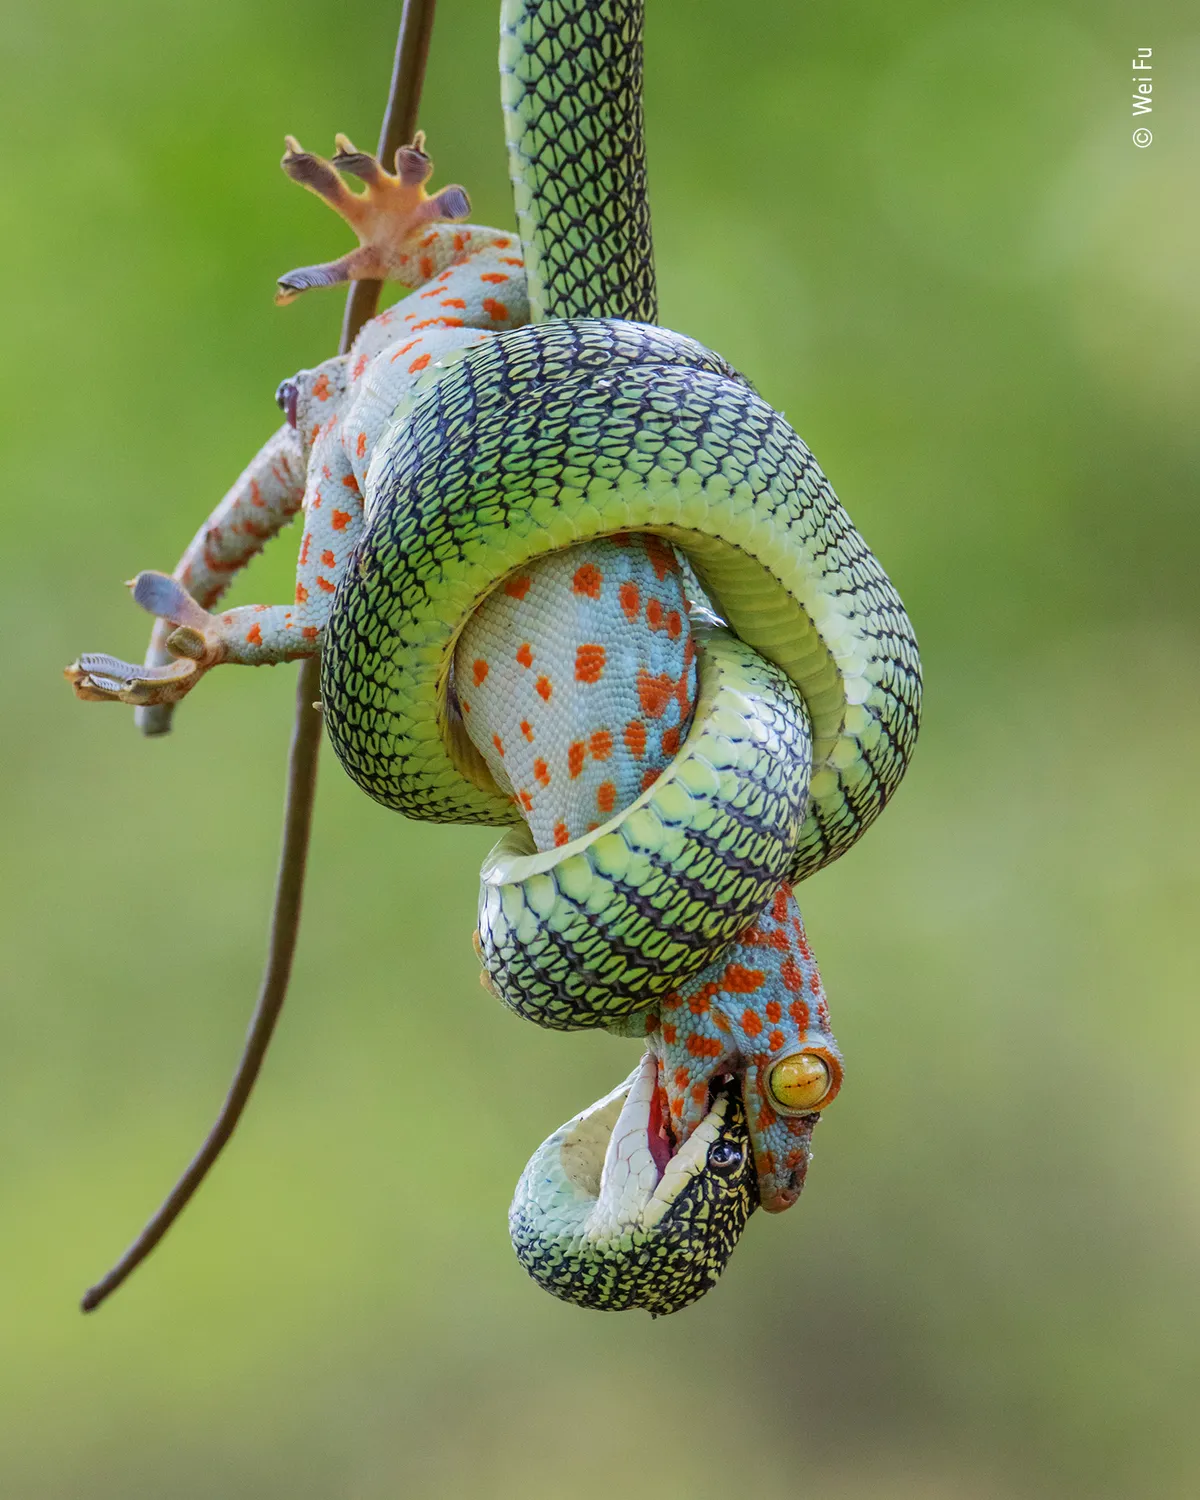 Category: Behaviour: Amphibians and Reptiles, Highly Commended. The gripping end. © Wei Fu (Thailand)/Wildlife Photographer of the Year